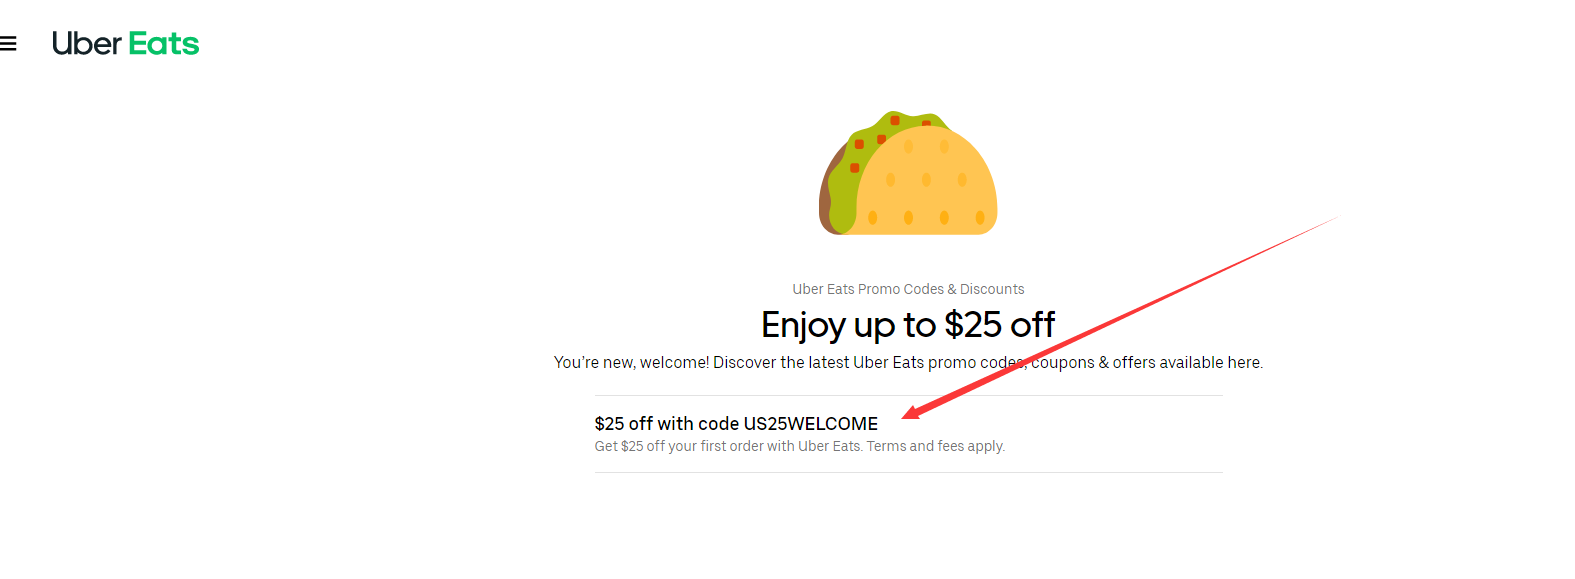 promo code uber eats new user,Save up to